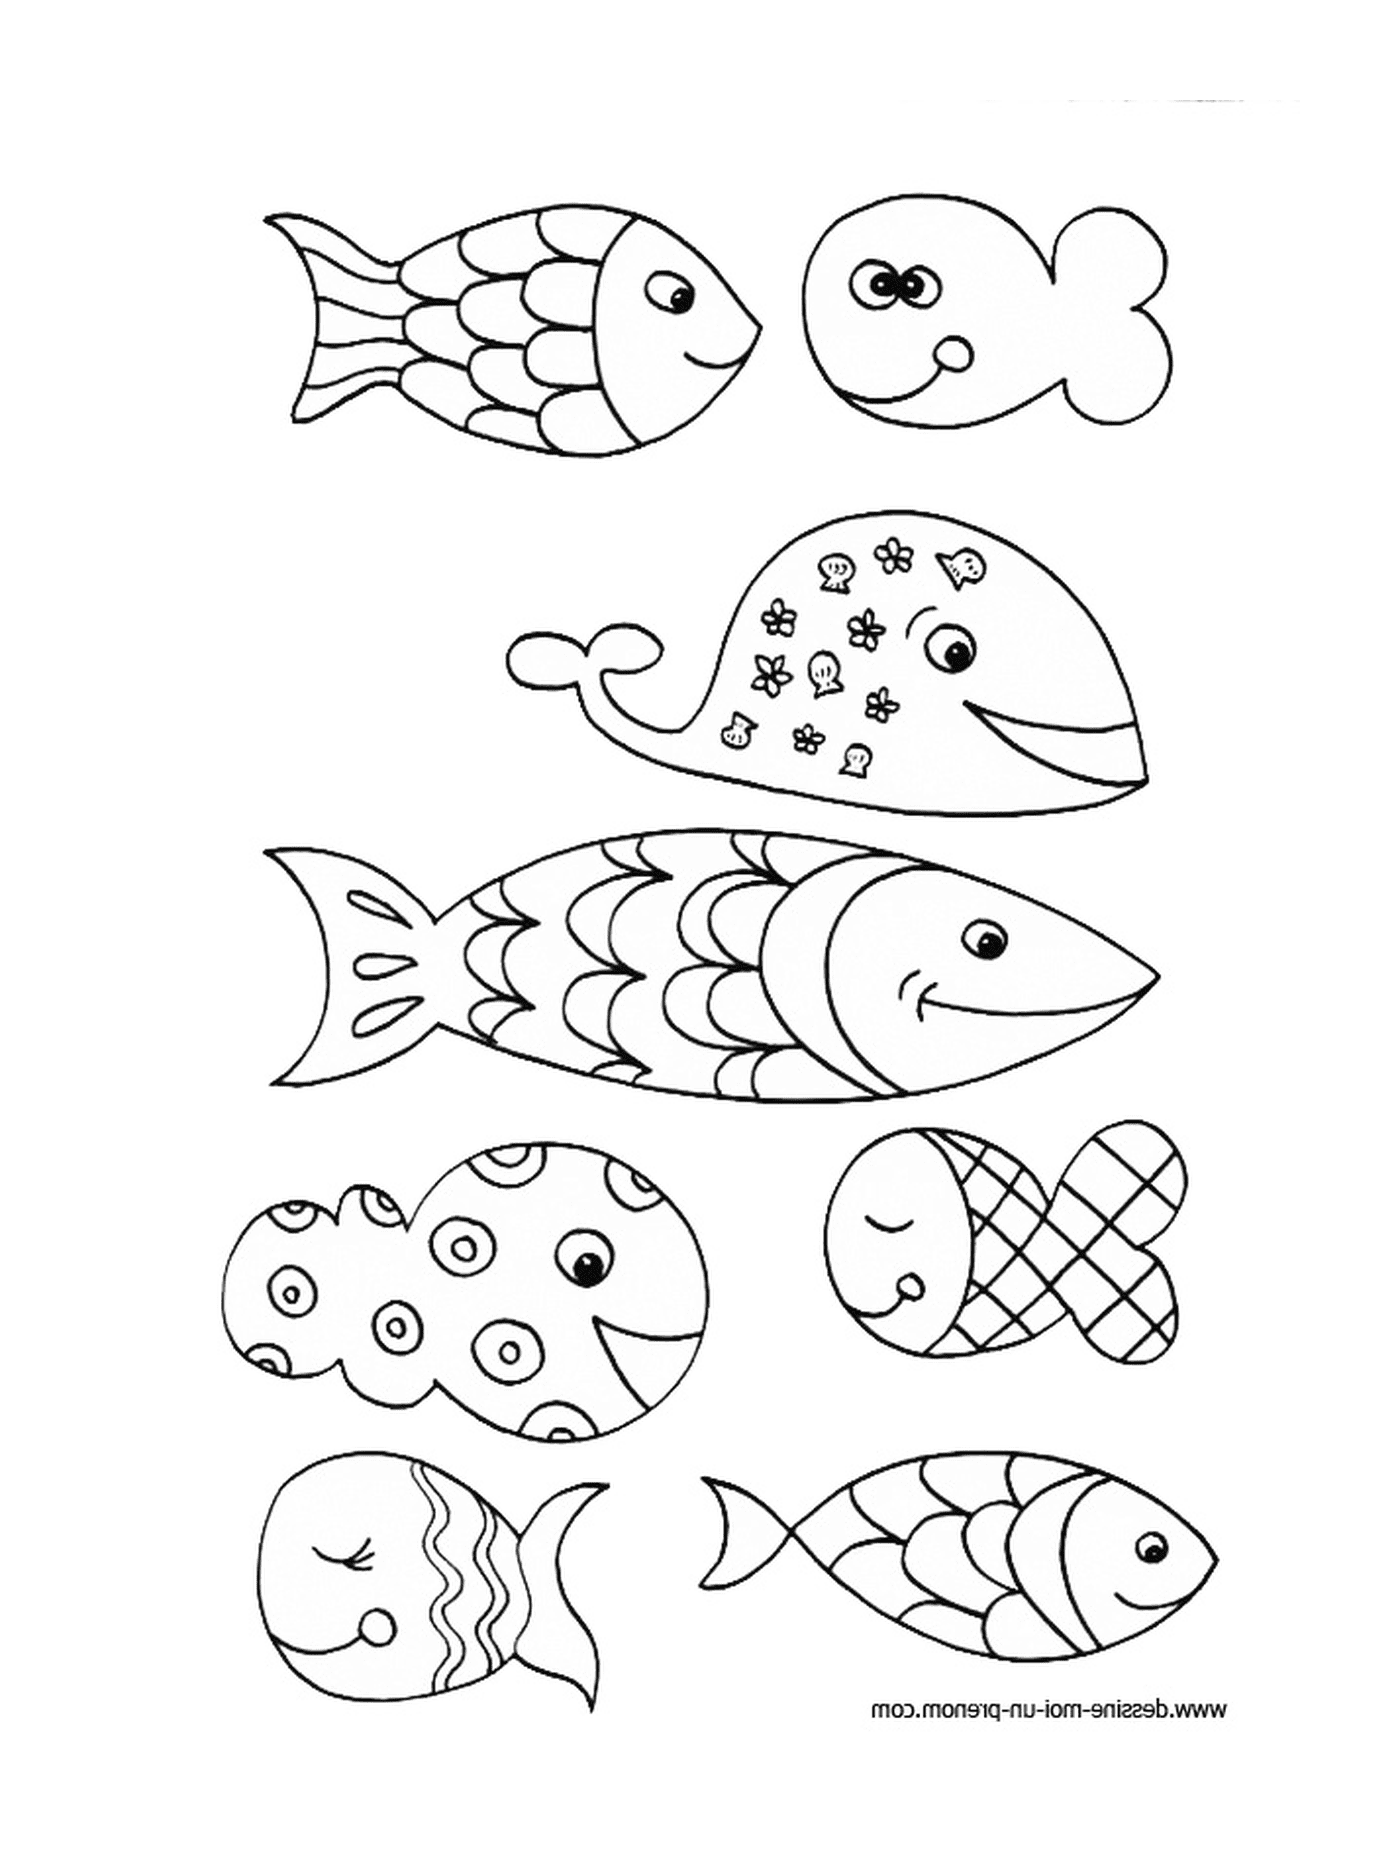  Alignment of several fishes 